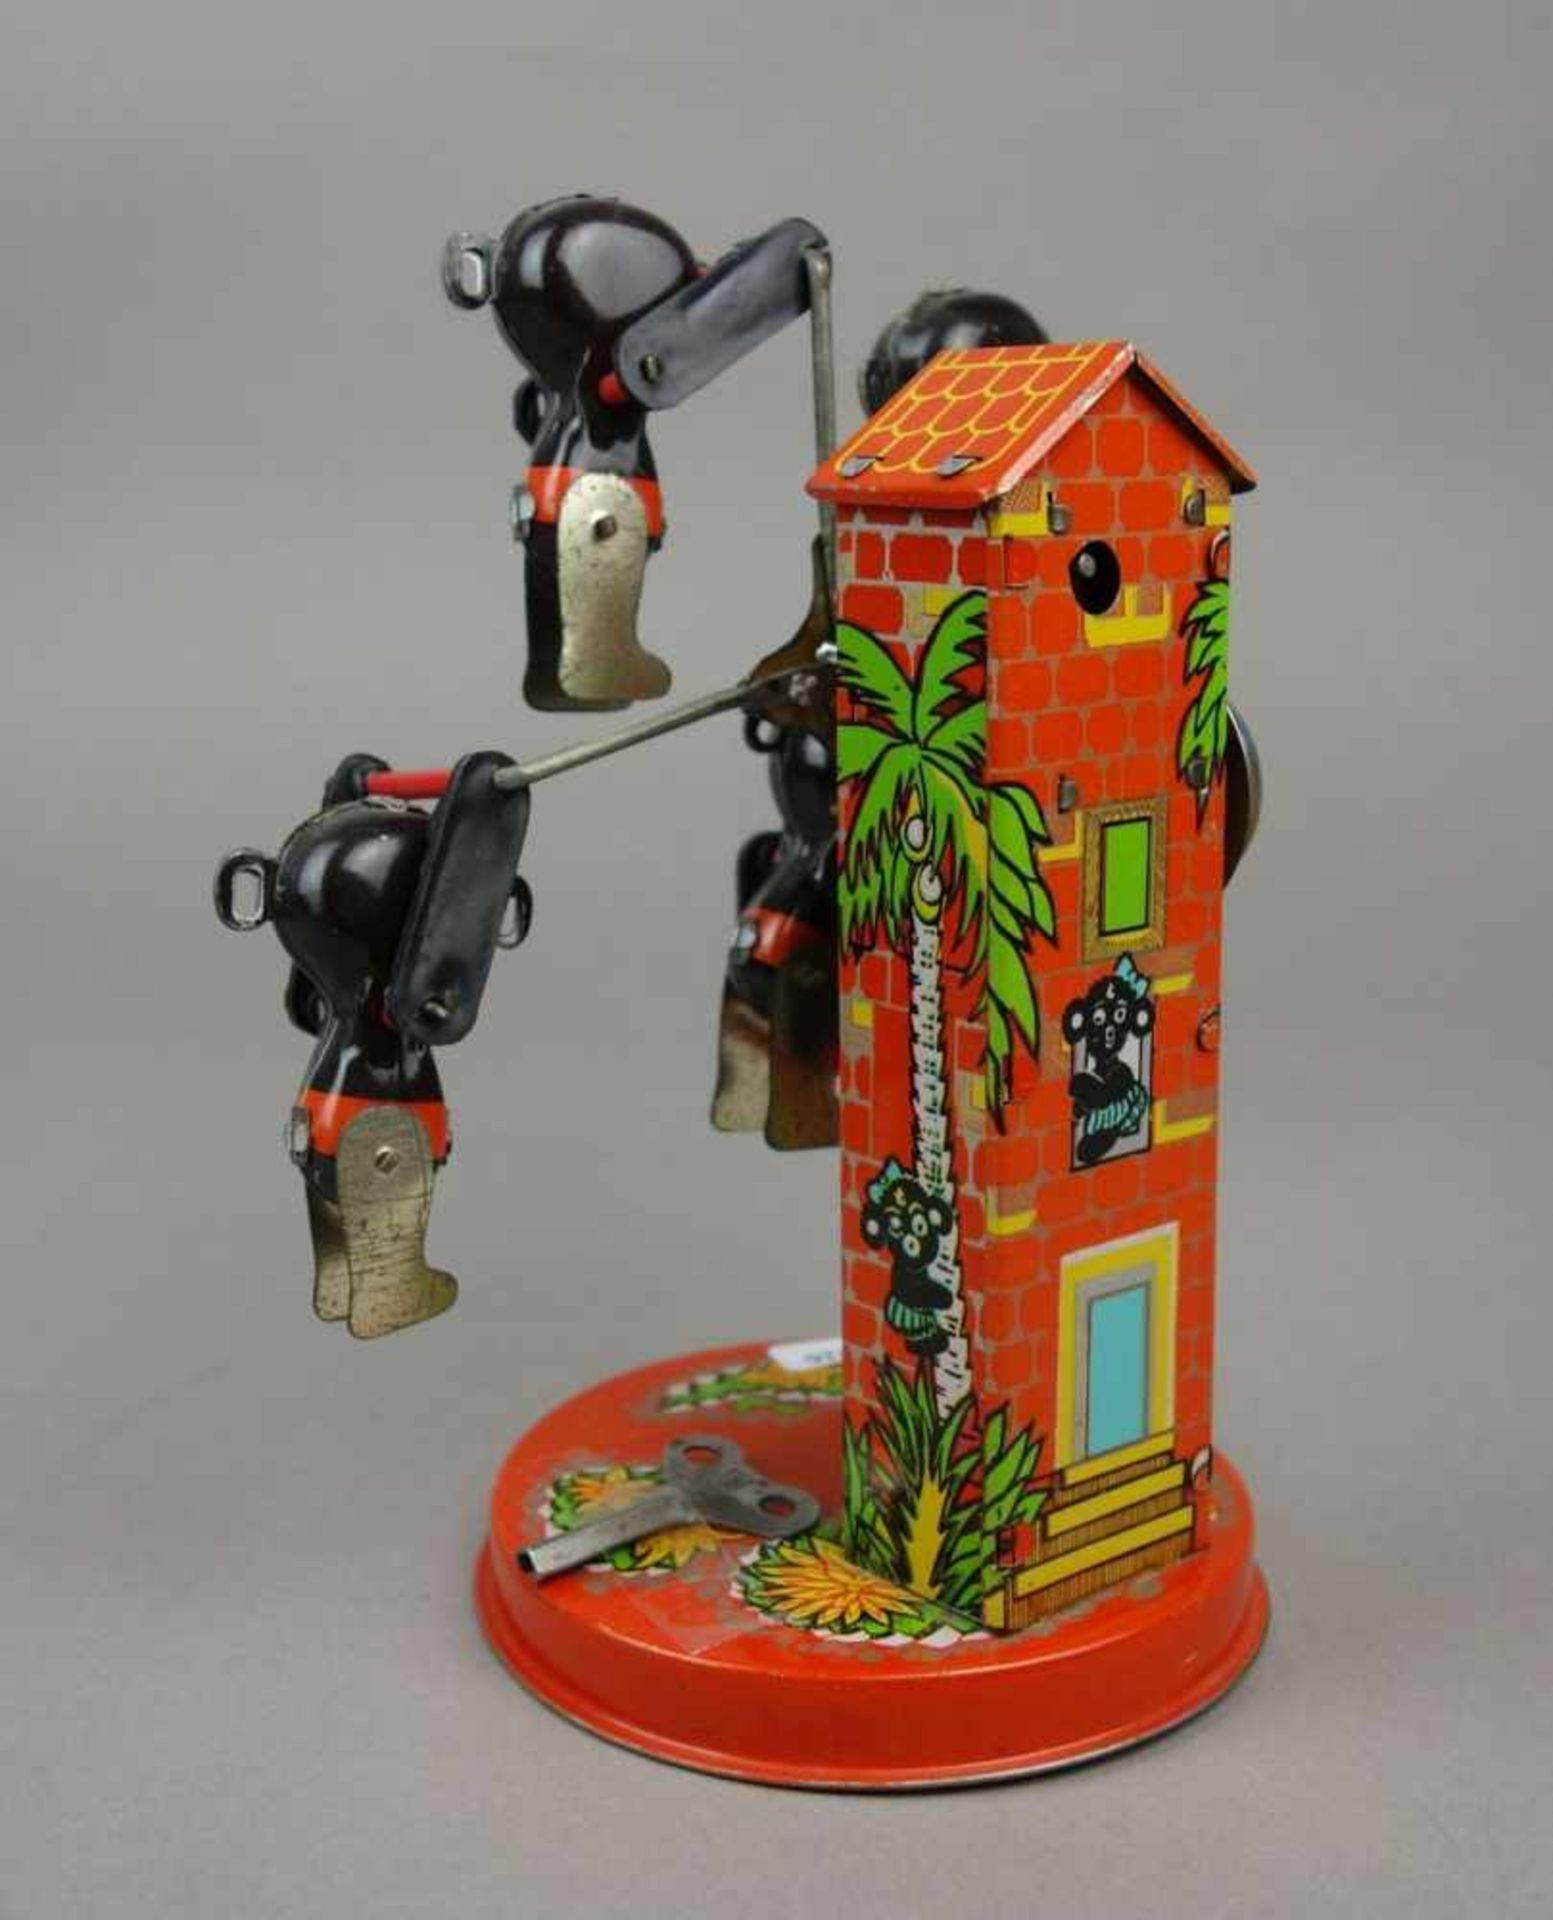 BLECHSPIELZEUG: Karussell / "Affenschaukel" / tin toy carousel with apes, Blech, polychrom - Image 5 of 7